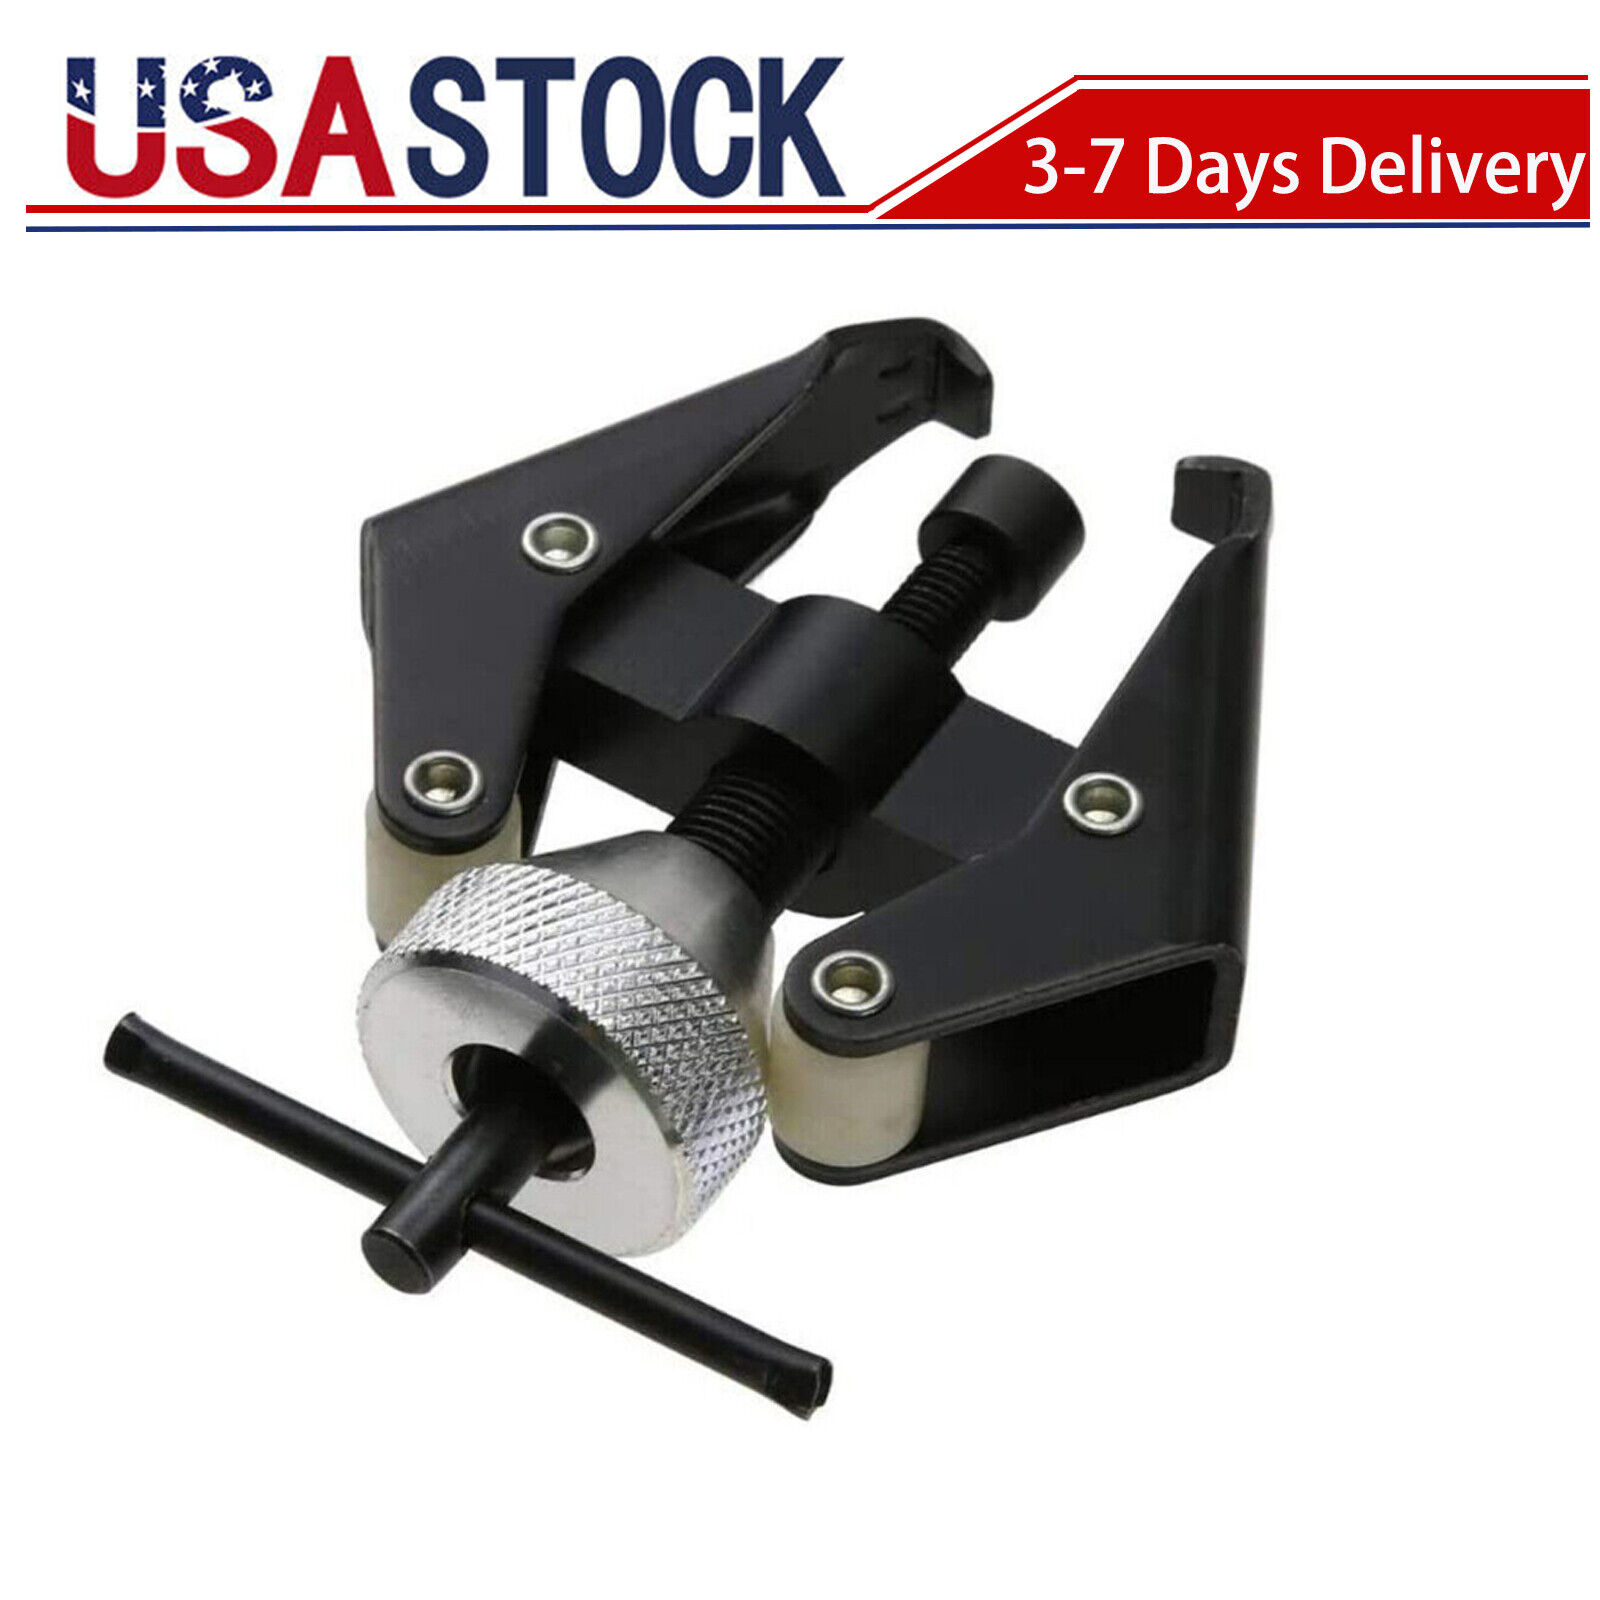 Battery Terminal Bearing Remover and Wiper Arm Puller Remover Jaw Opening 6-28mm